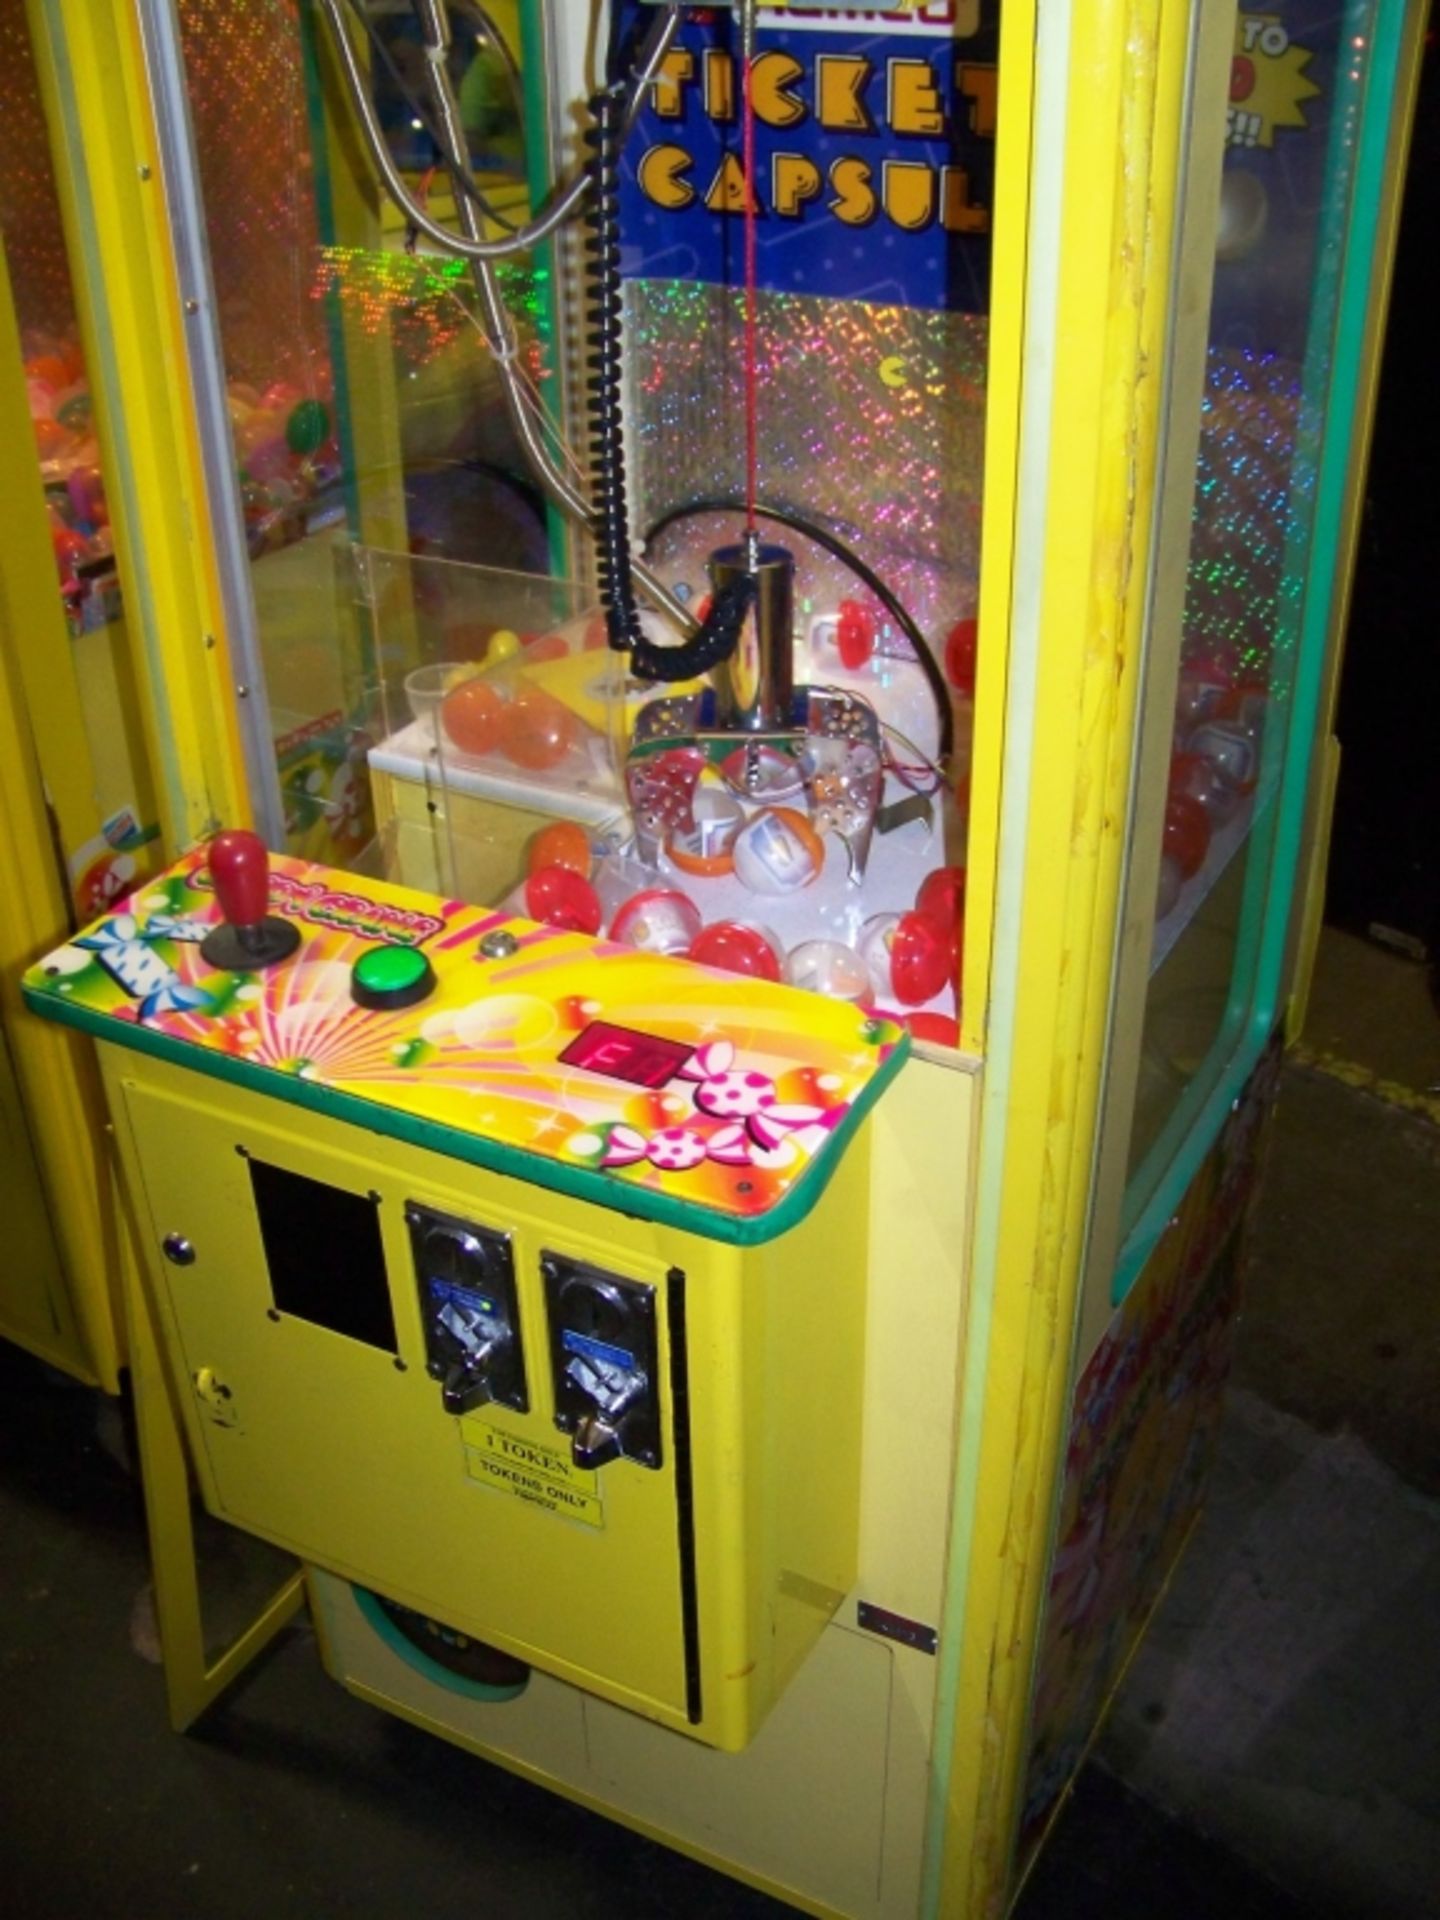 24"" CANDY SHOPPE CRANE MACHINE COASTAL Item is in used condition. Evidence of wear and commercial - Image 2 of 3